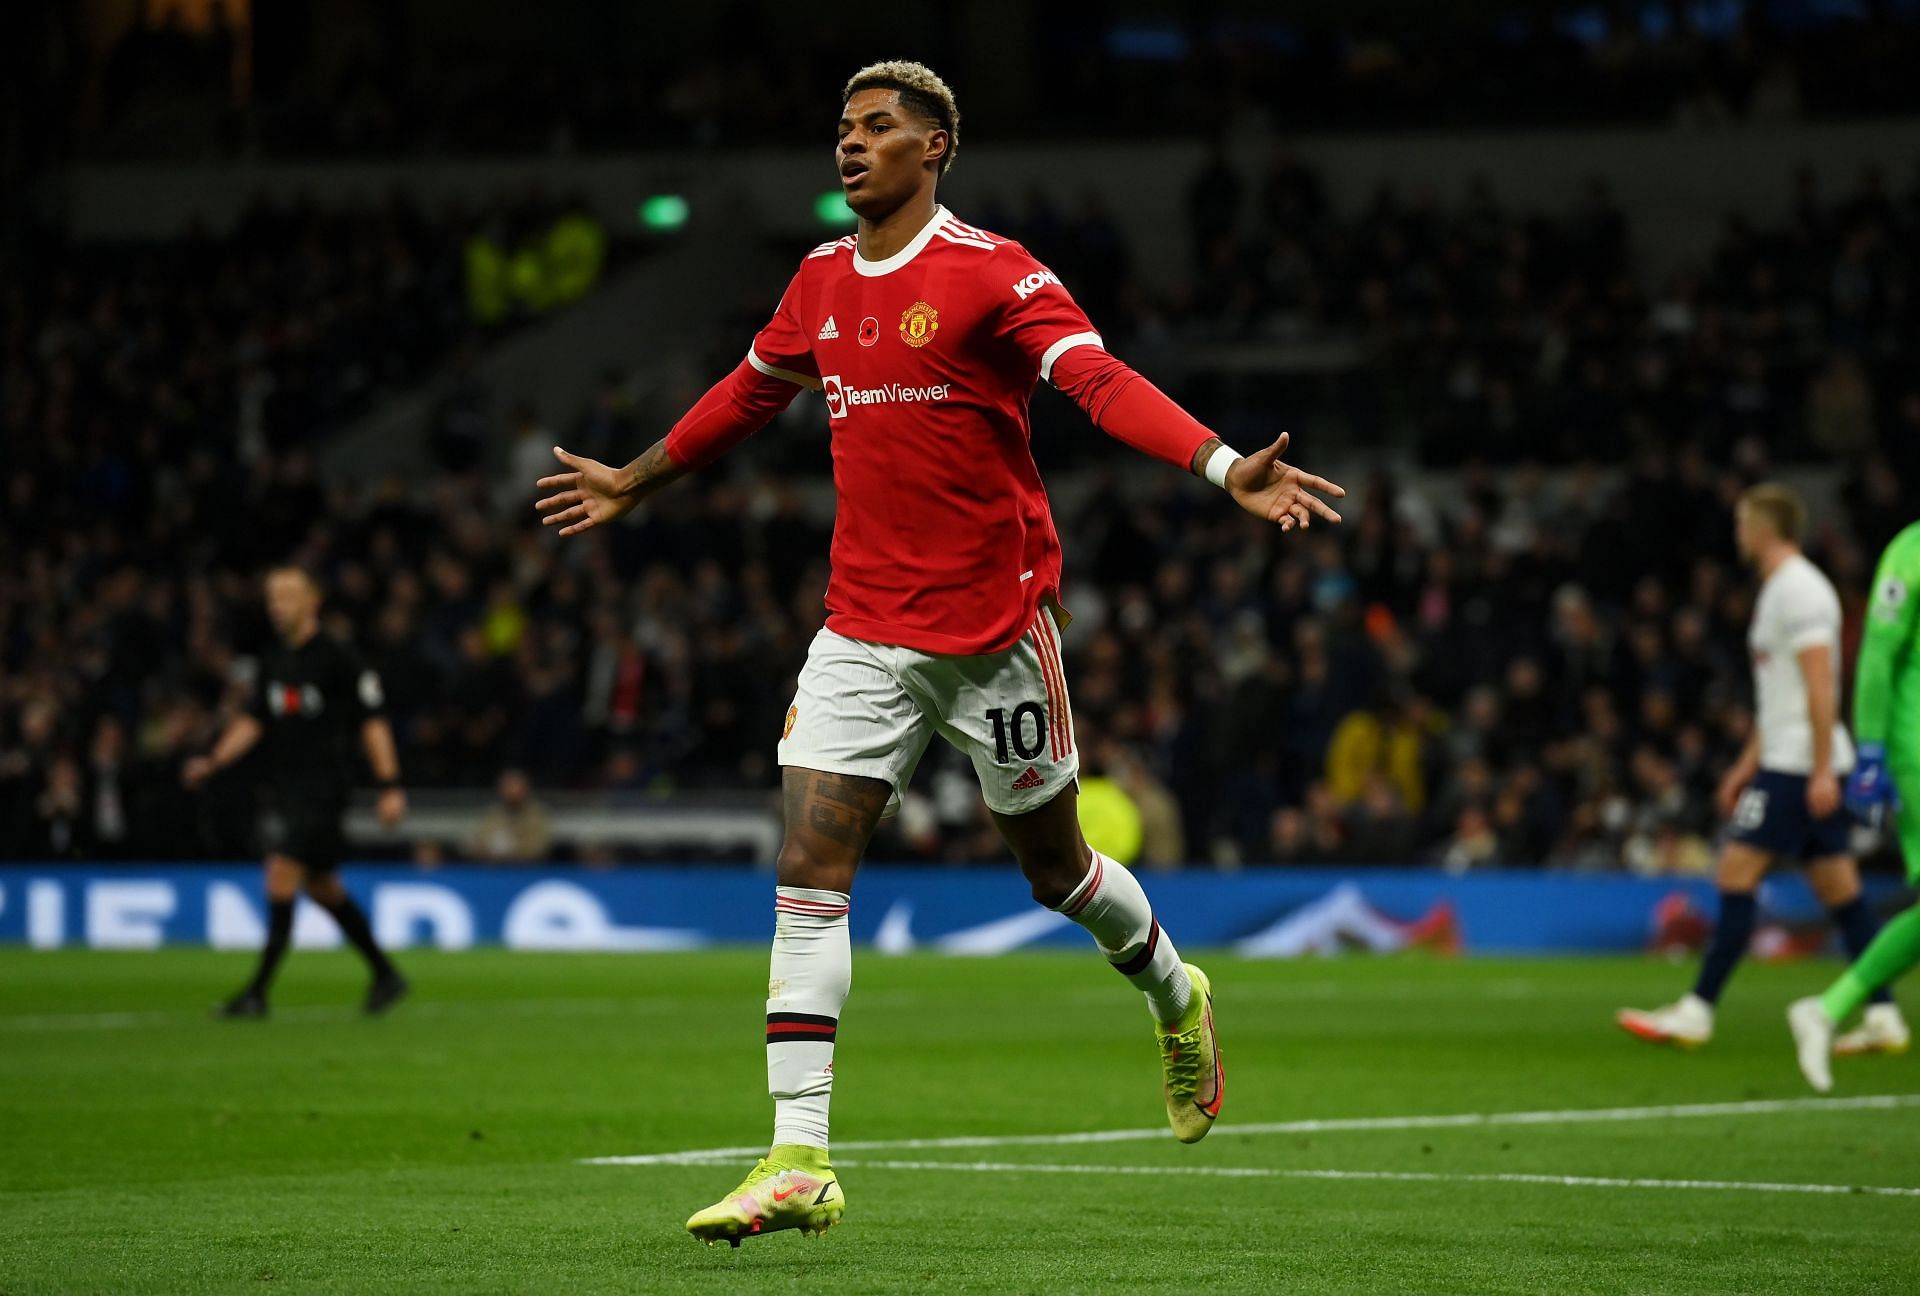 5 possible destinations for Marcus Rashford if he leaves Manchester United